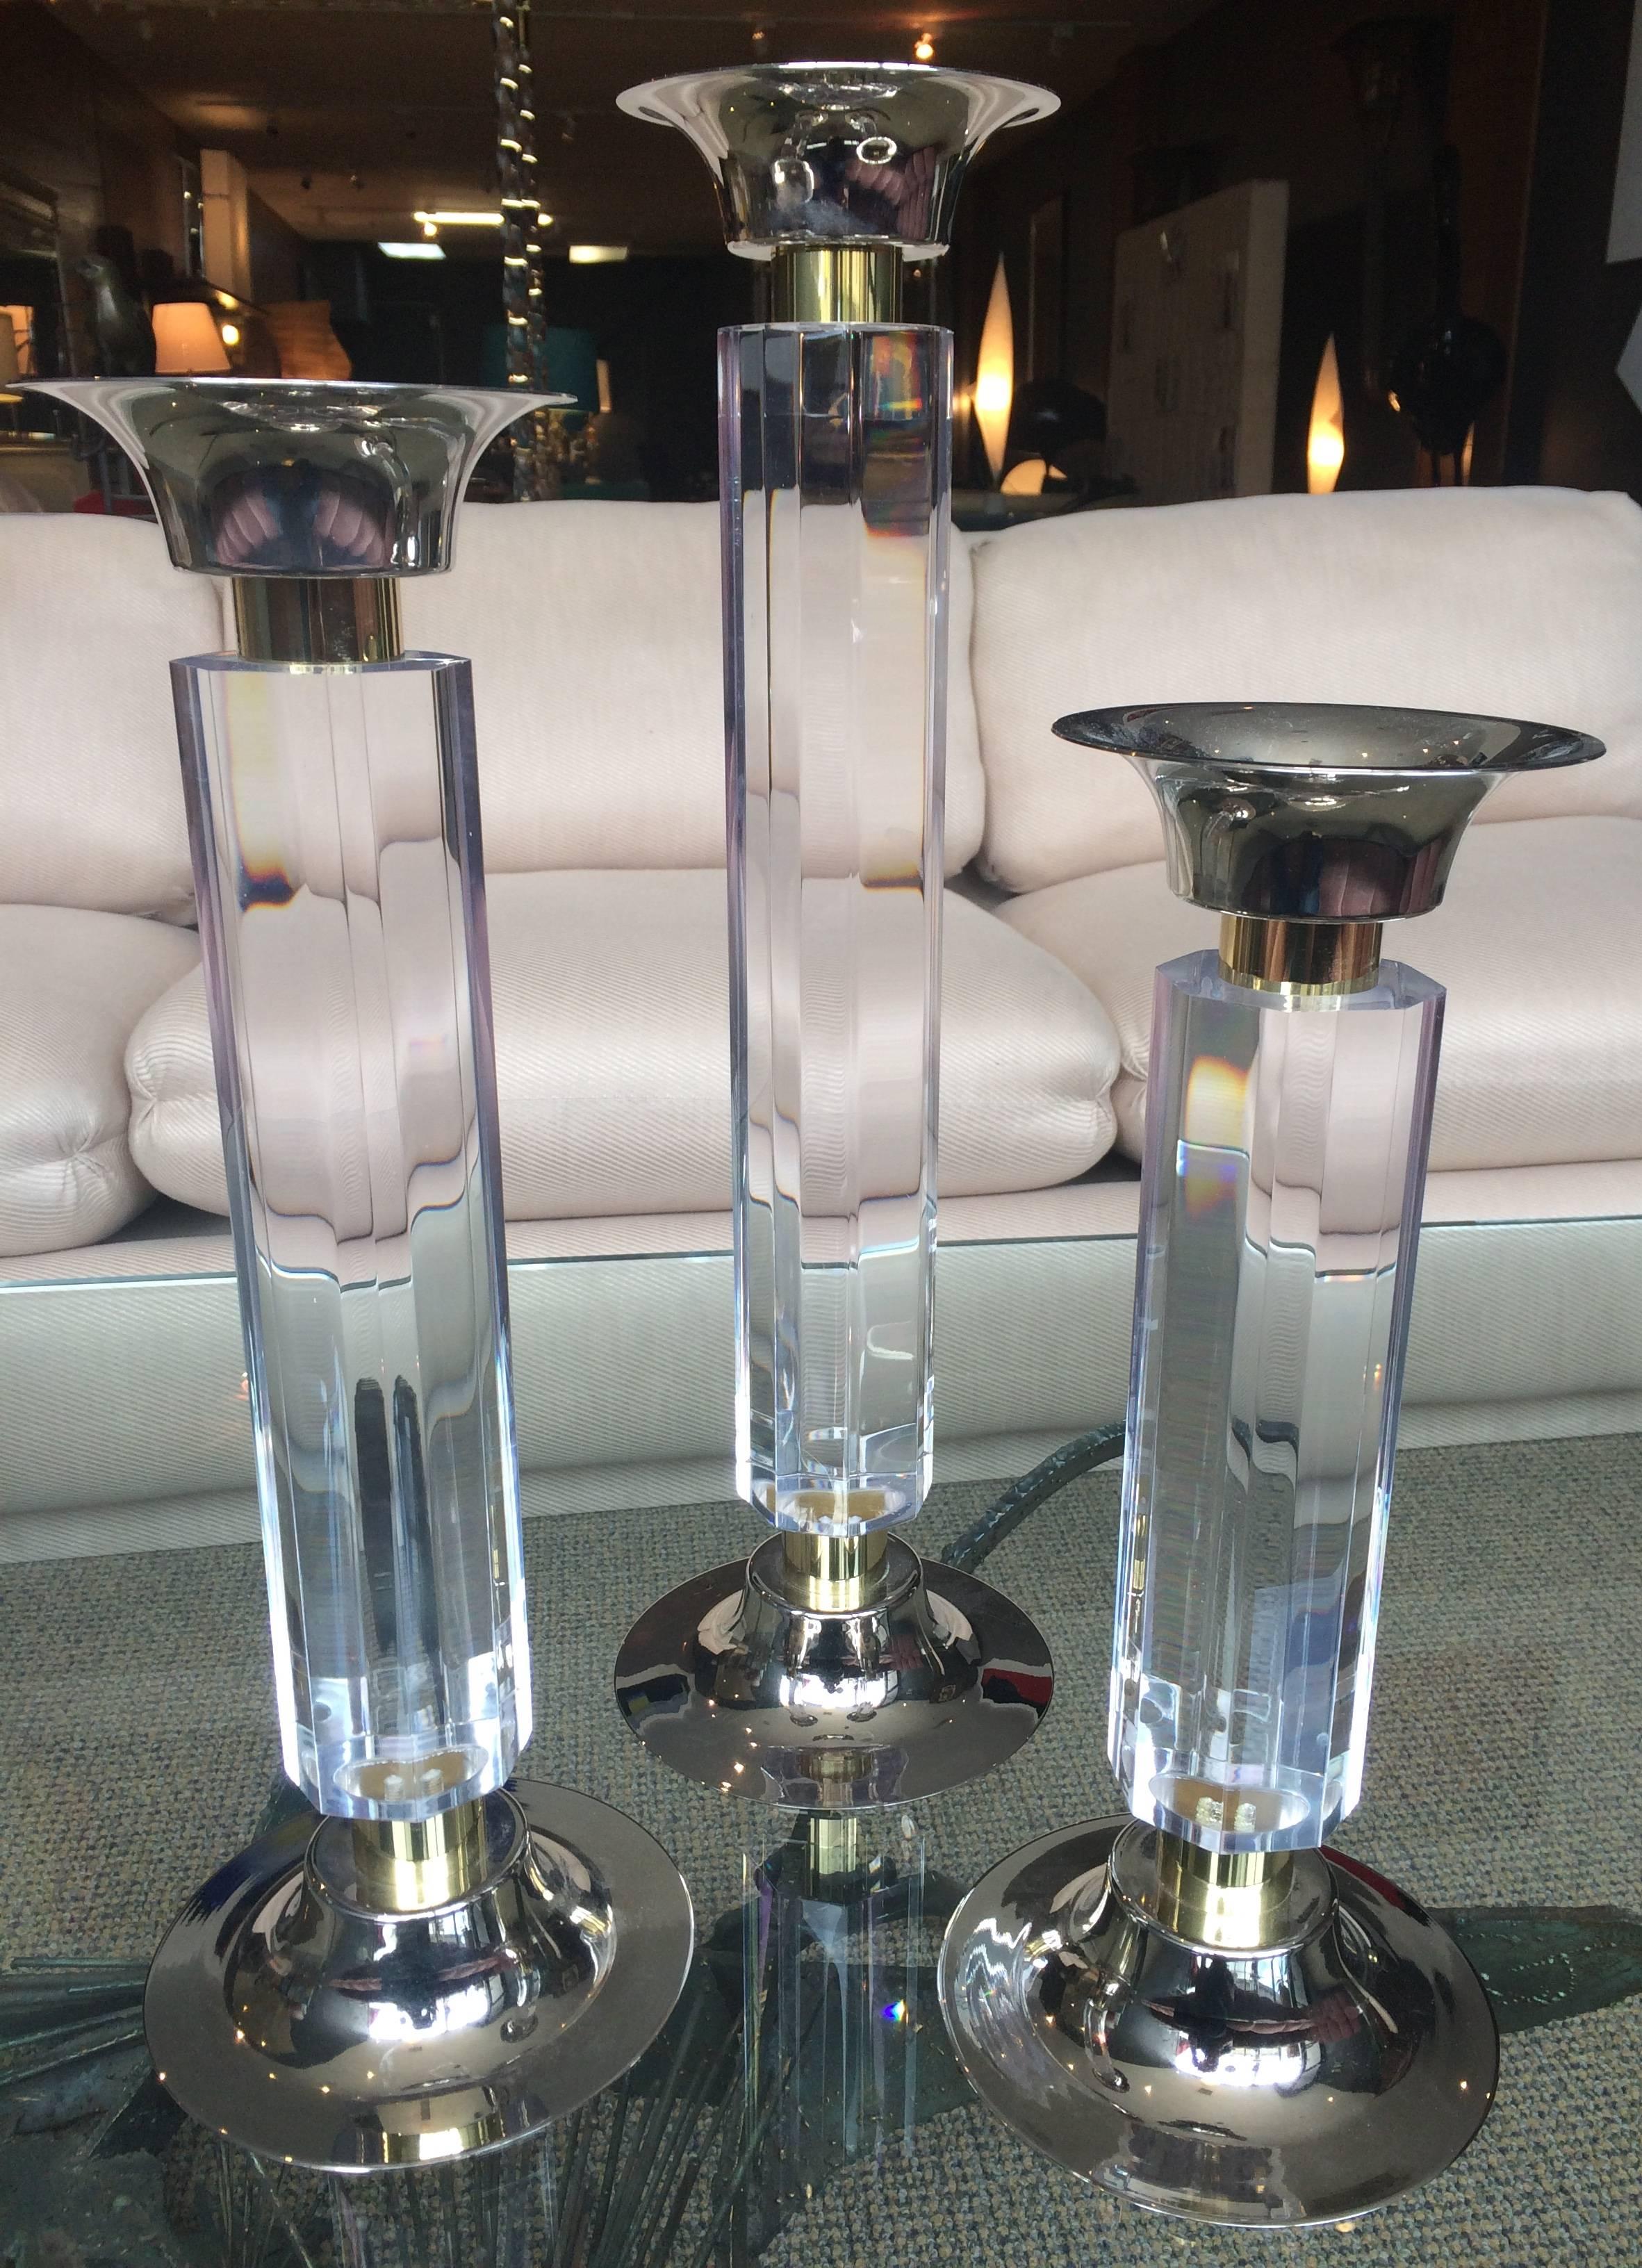 Stunning set of three large candleholders in Lucite brass and nickel bases designed and manufactured by Amparo Calderon Tapia for Cain Modern.

The pieces are very large and imposing, the Lucite has an octagonal shape an it is 2 3/4